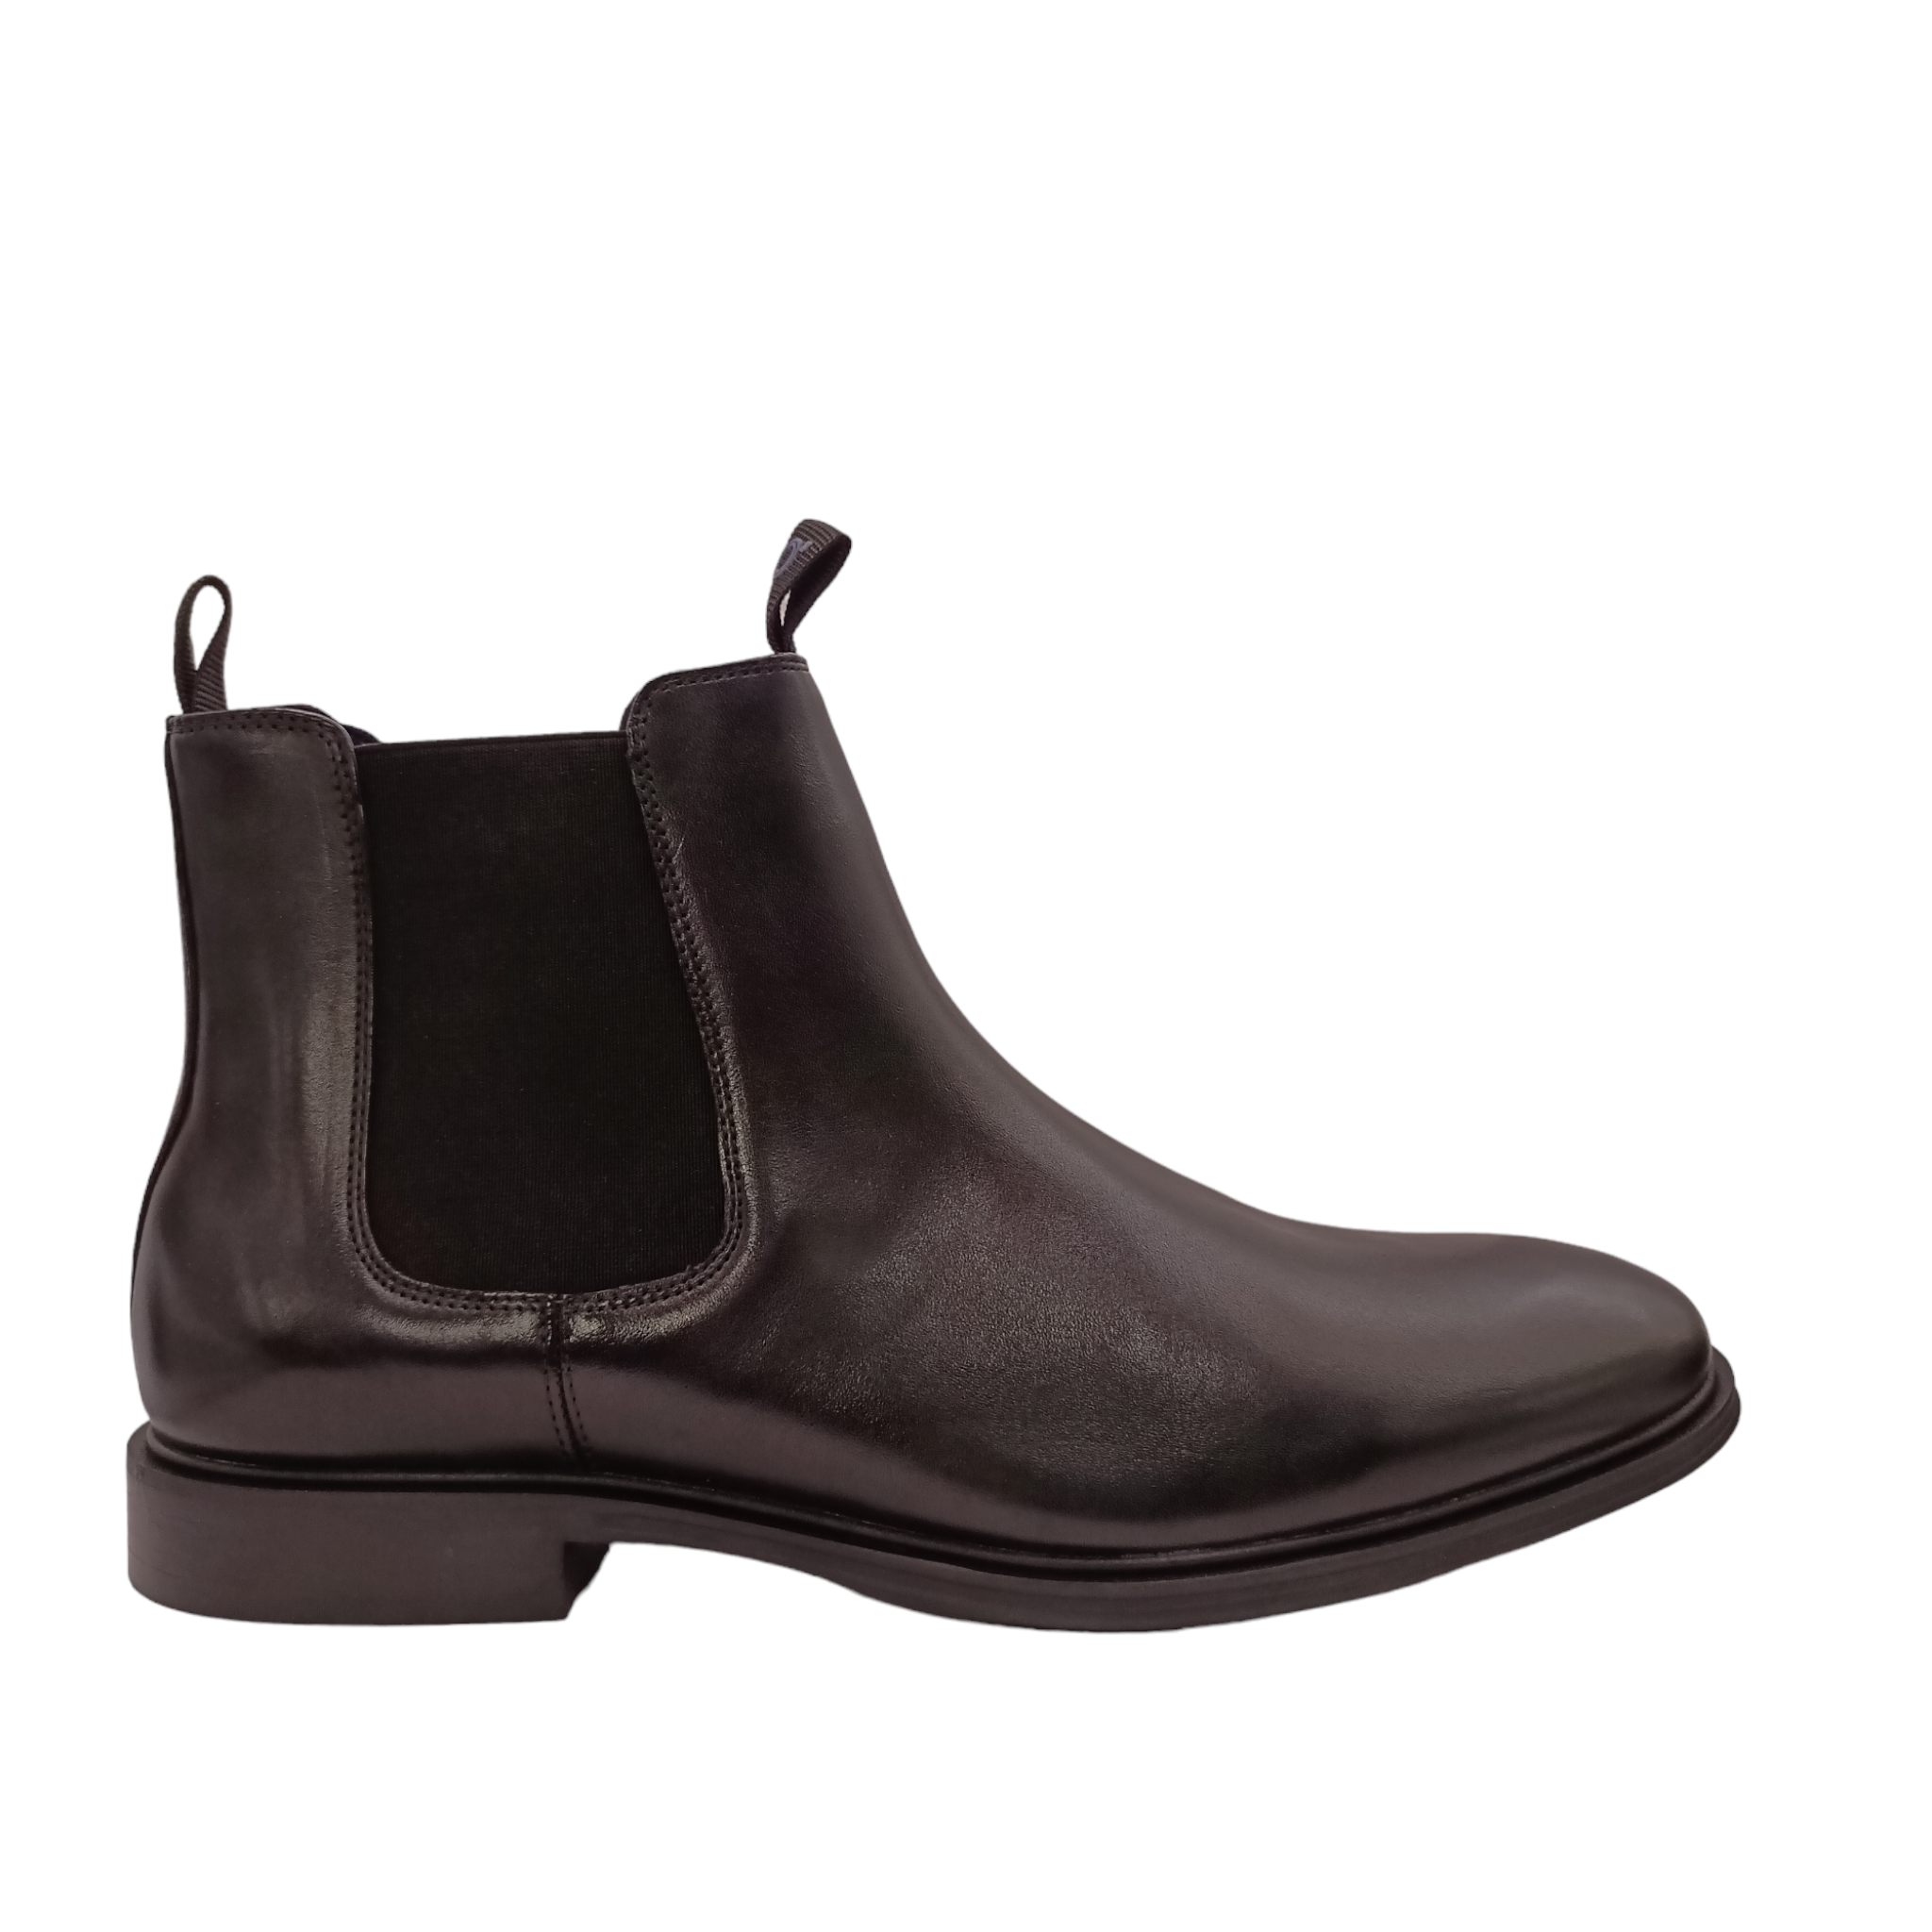 Shop Longreach Julius Marlow - with shoe&amp;me - from Julius Marlow - Boots - Boot, Mens, Winter